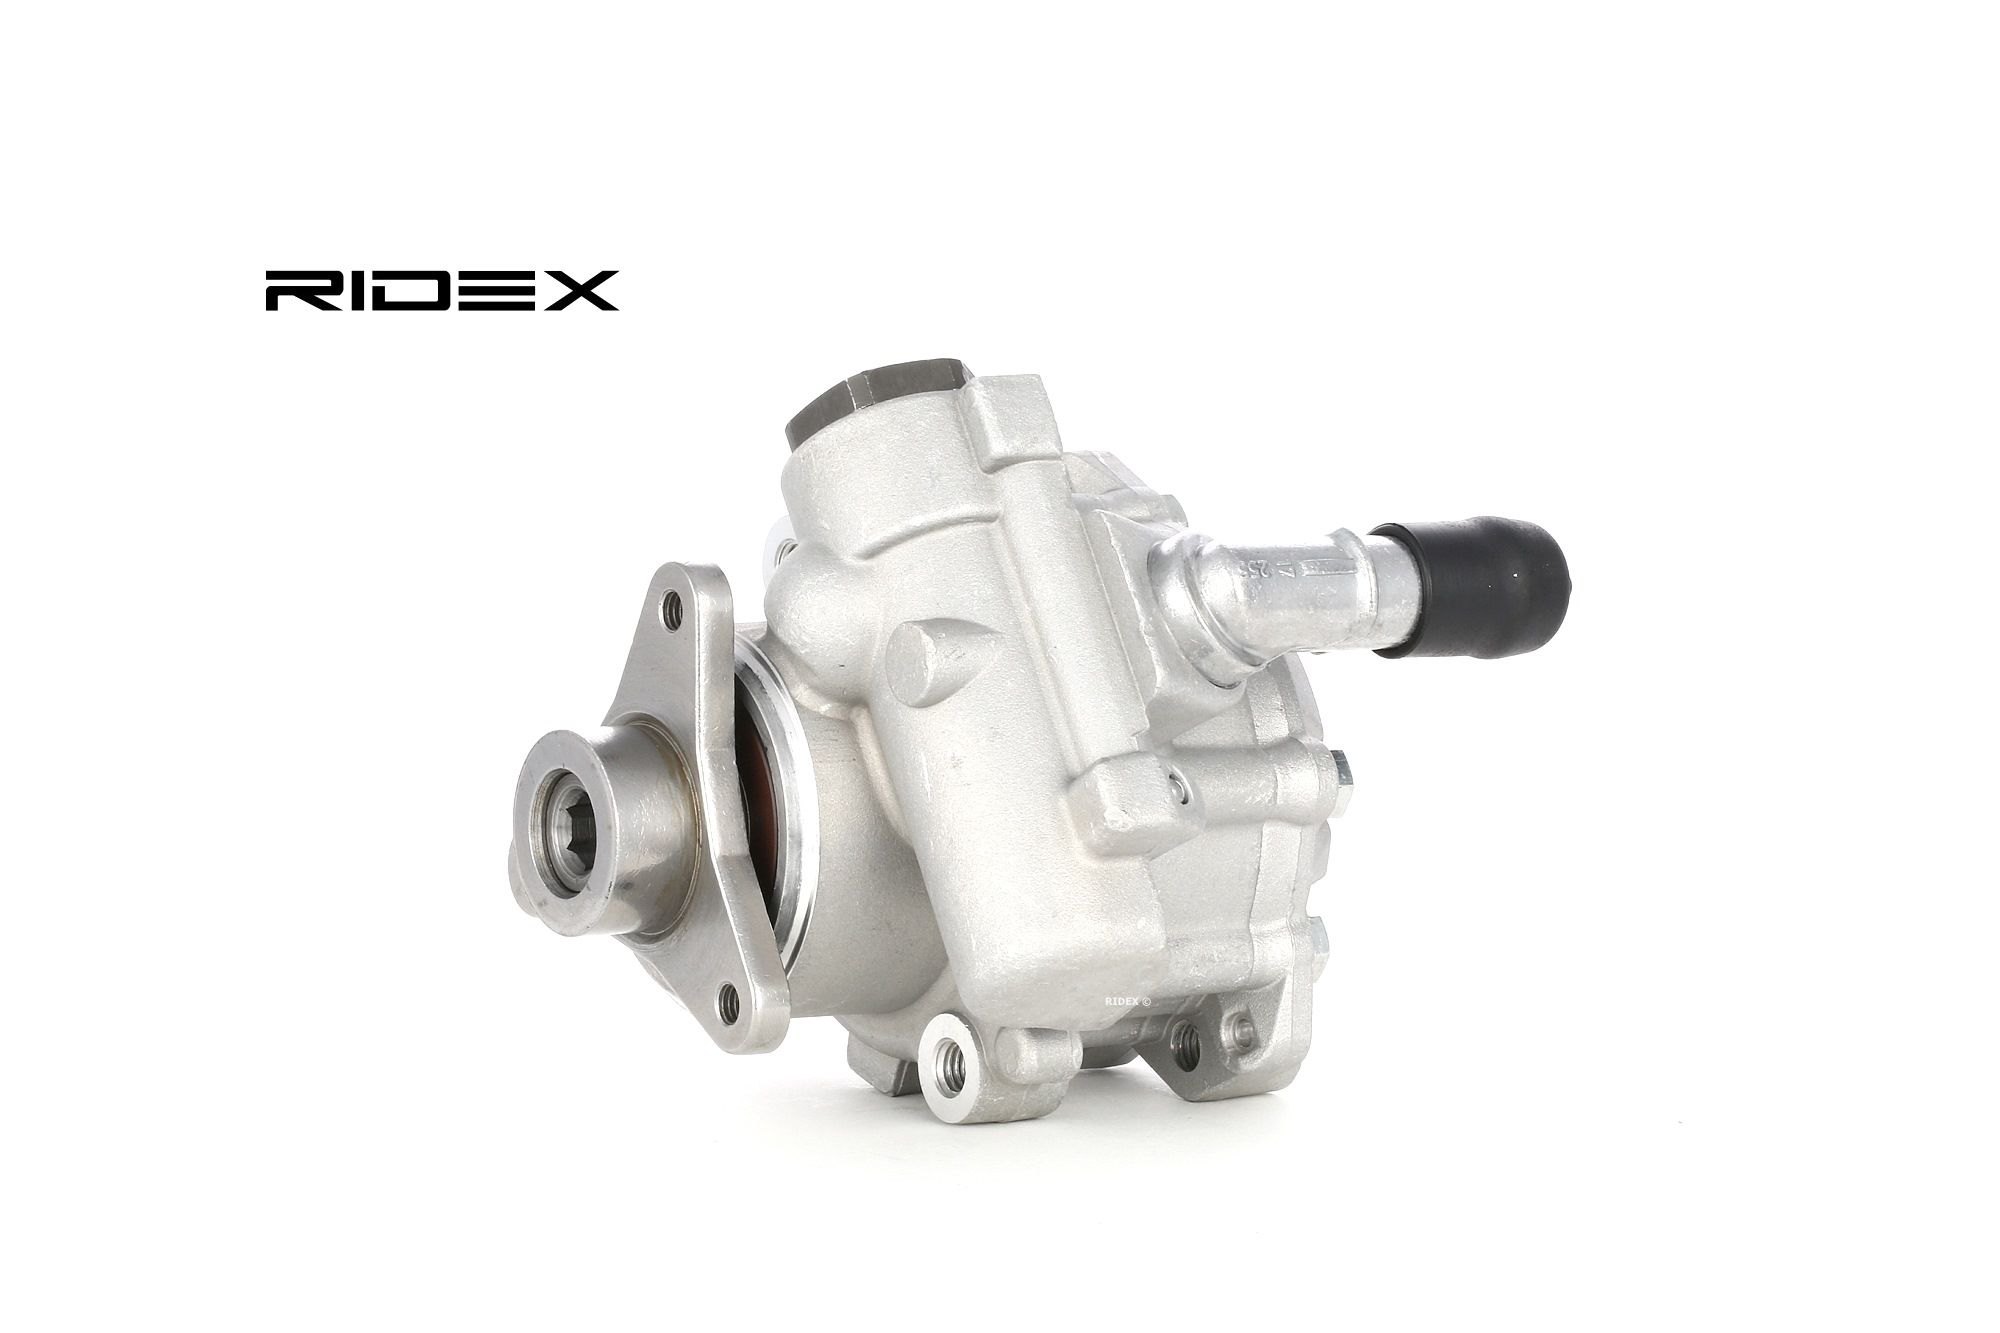 RIDEX 12H0033 Power steering pump Hydraulic, 120 bar, M16x1.5, Star Shape, for left-hand/right-hand drive vehicles